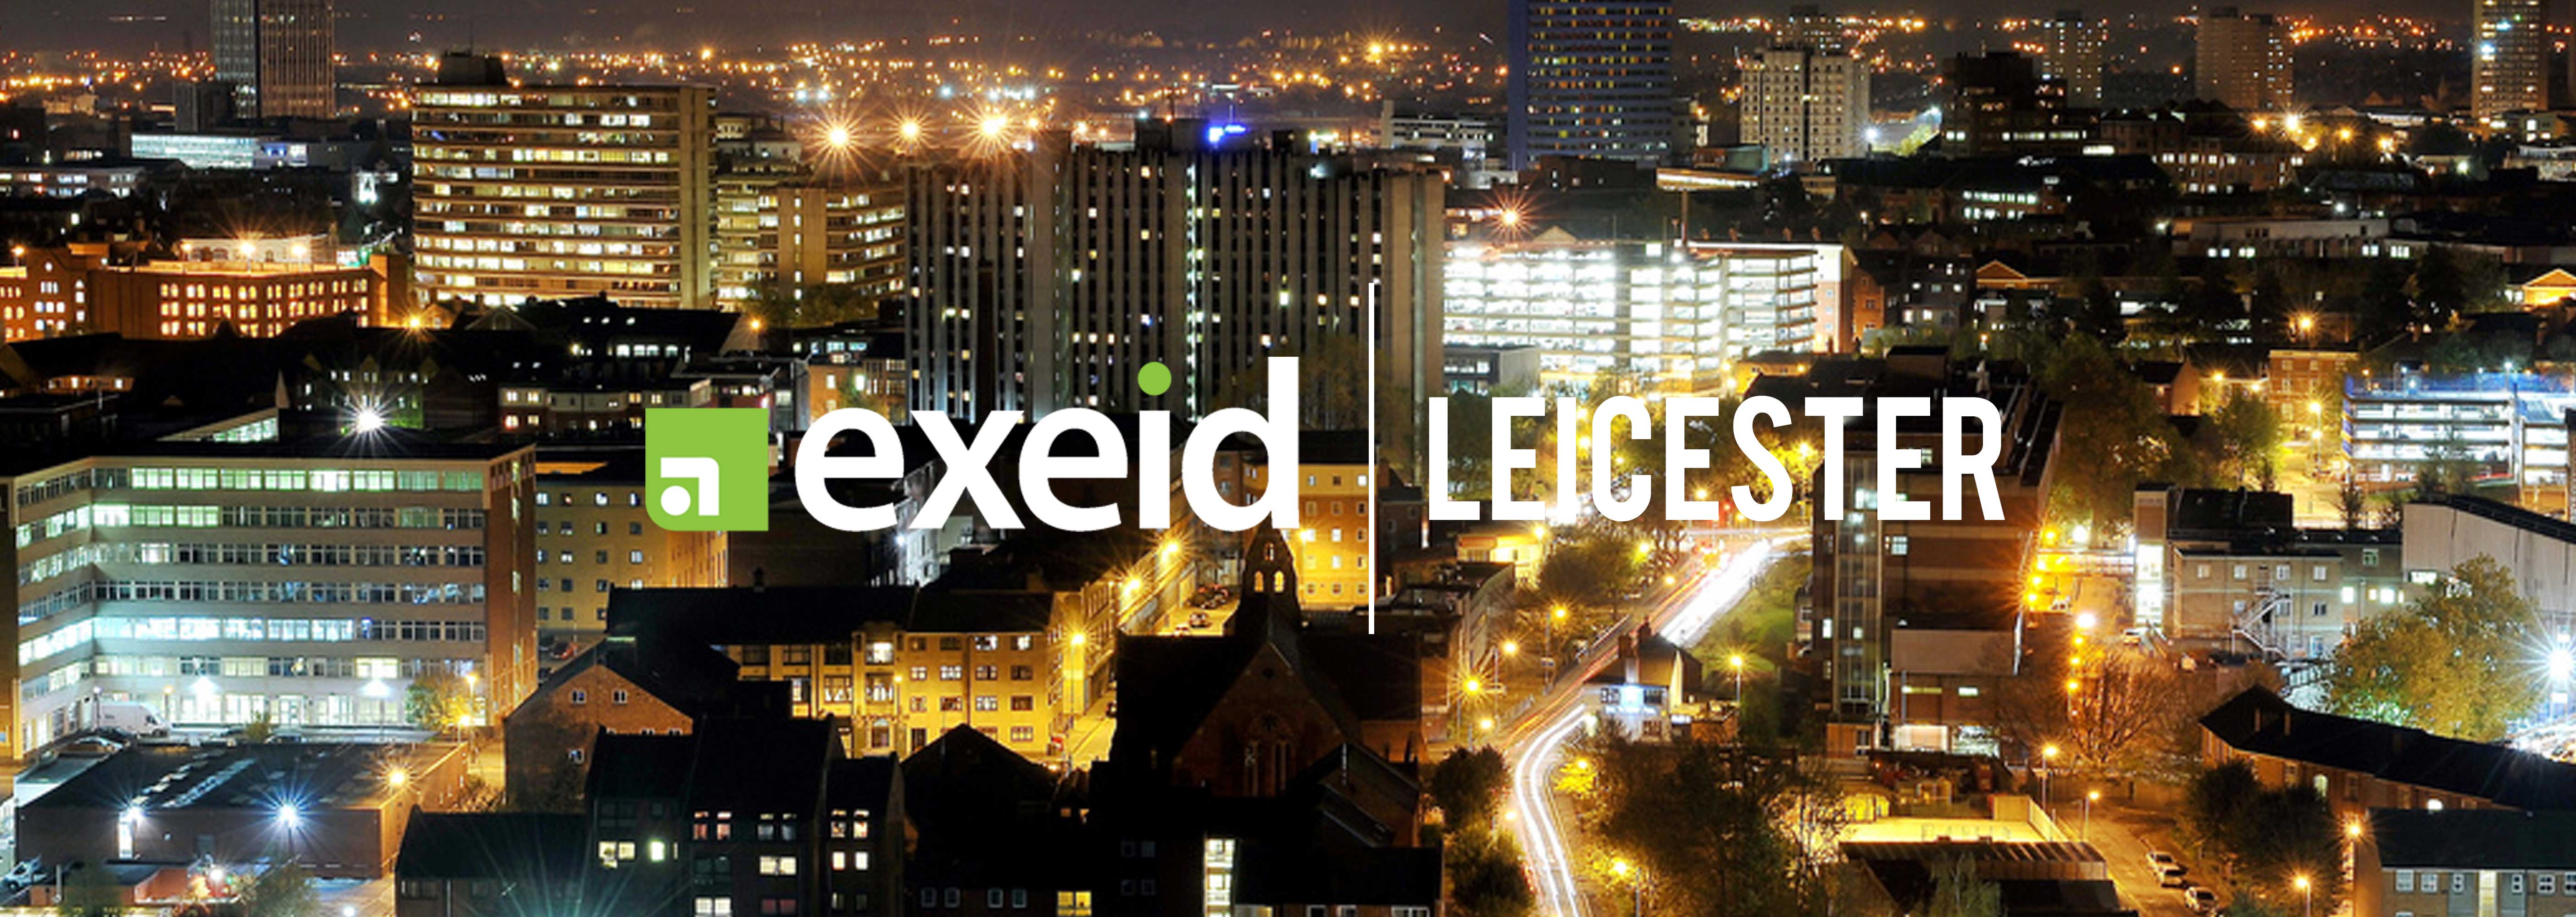 Serviced offices Leicester - Leicester business centres.